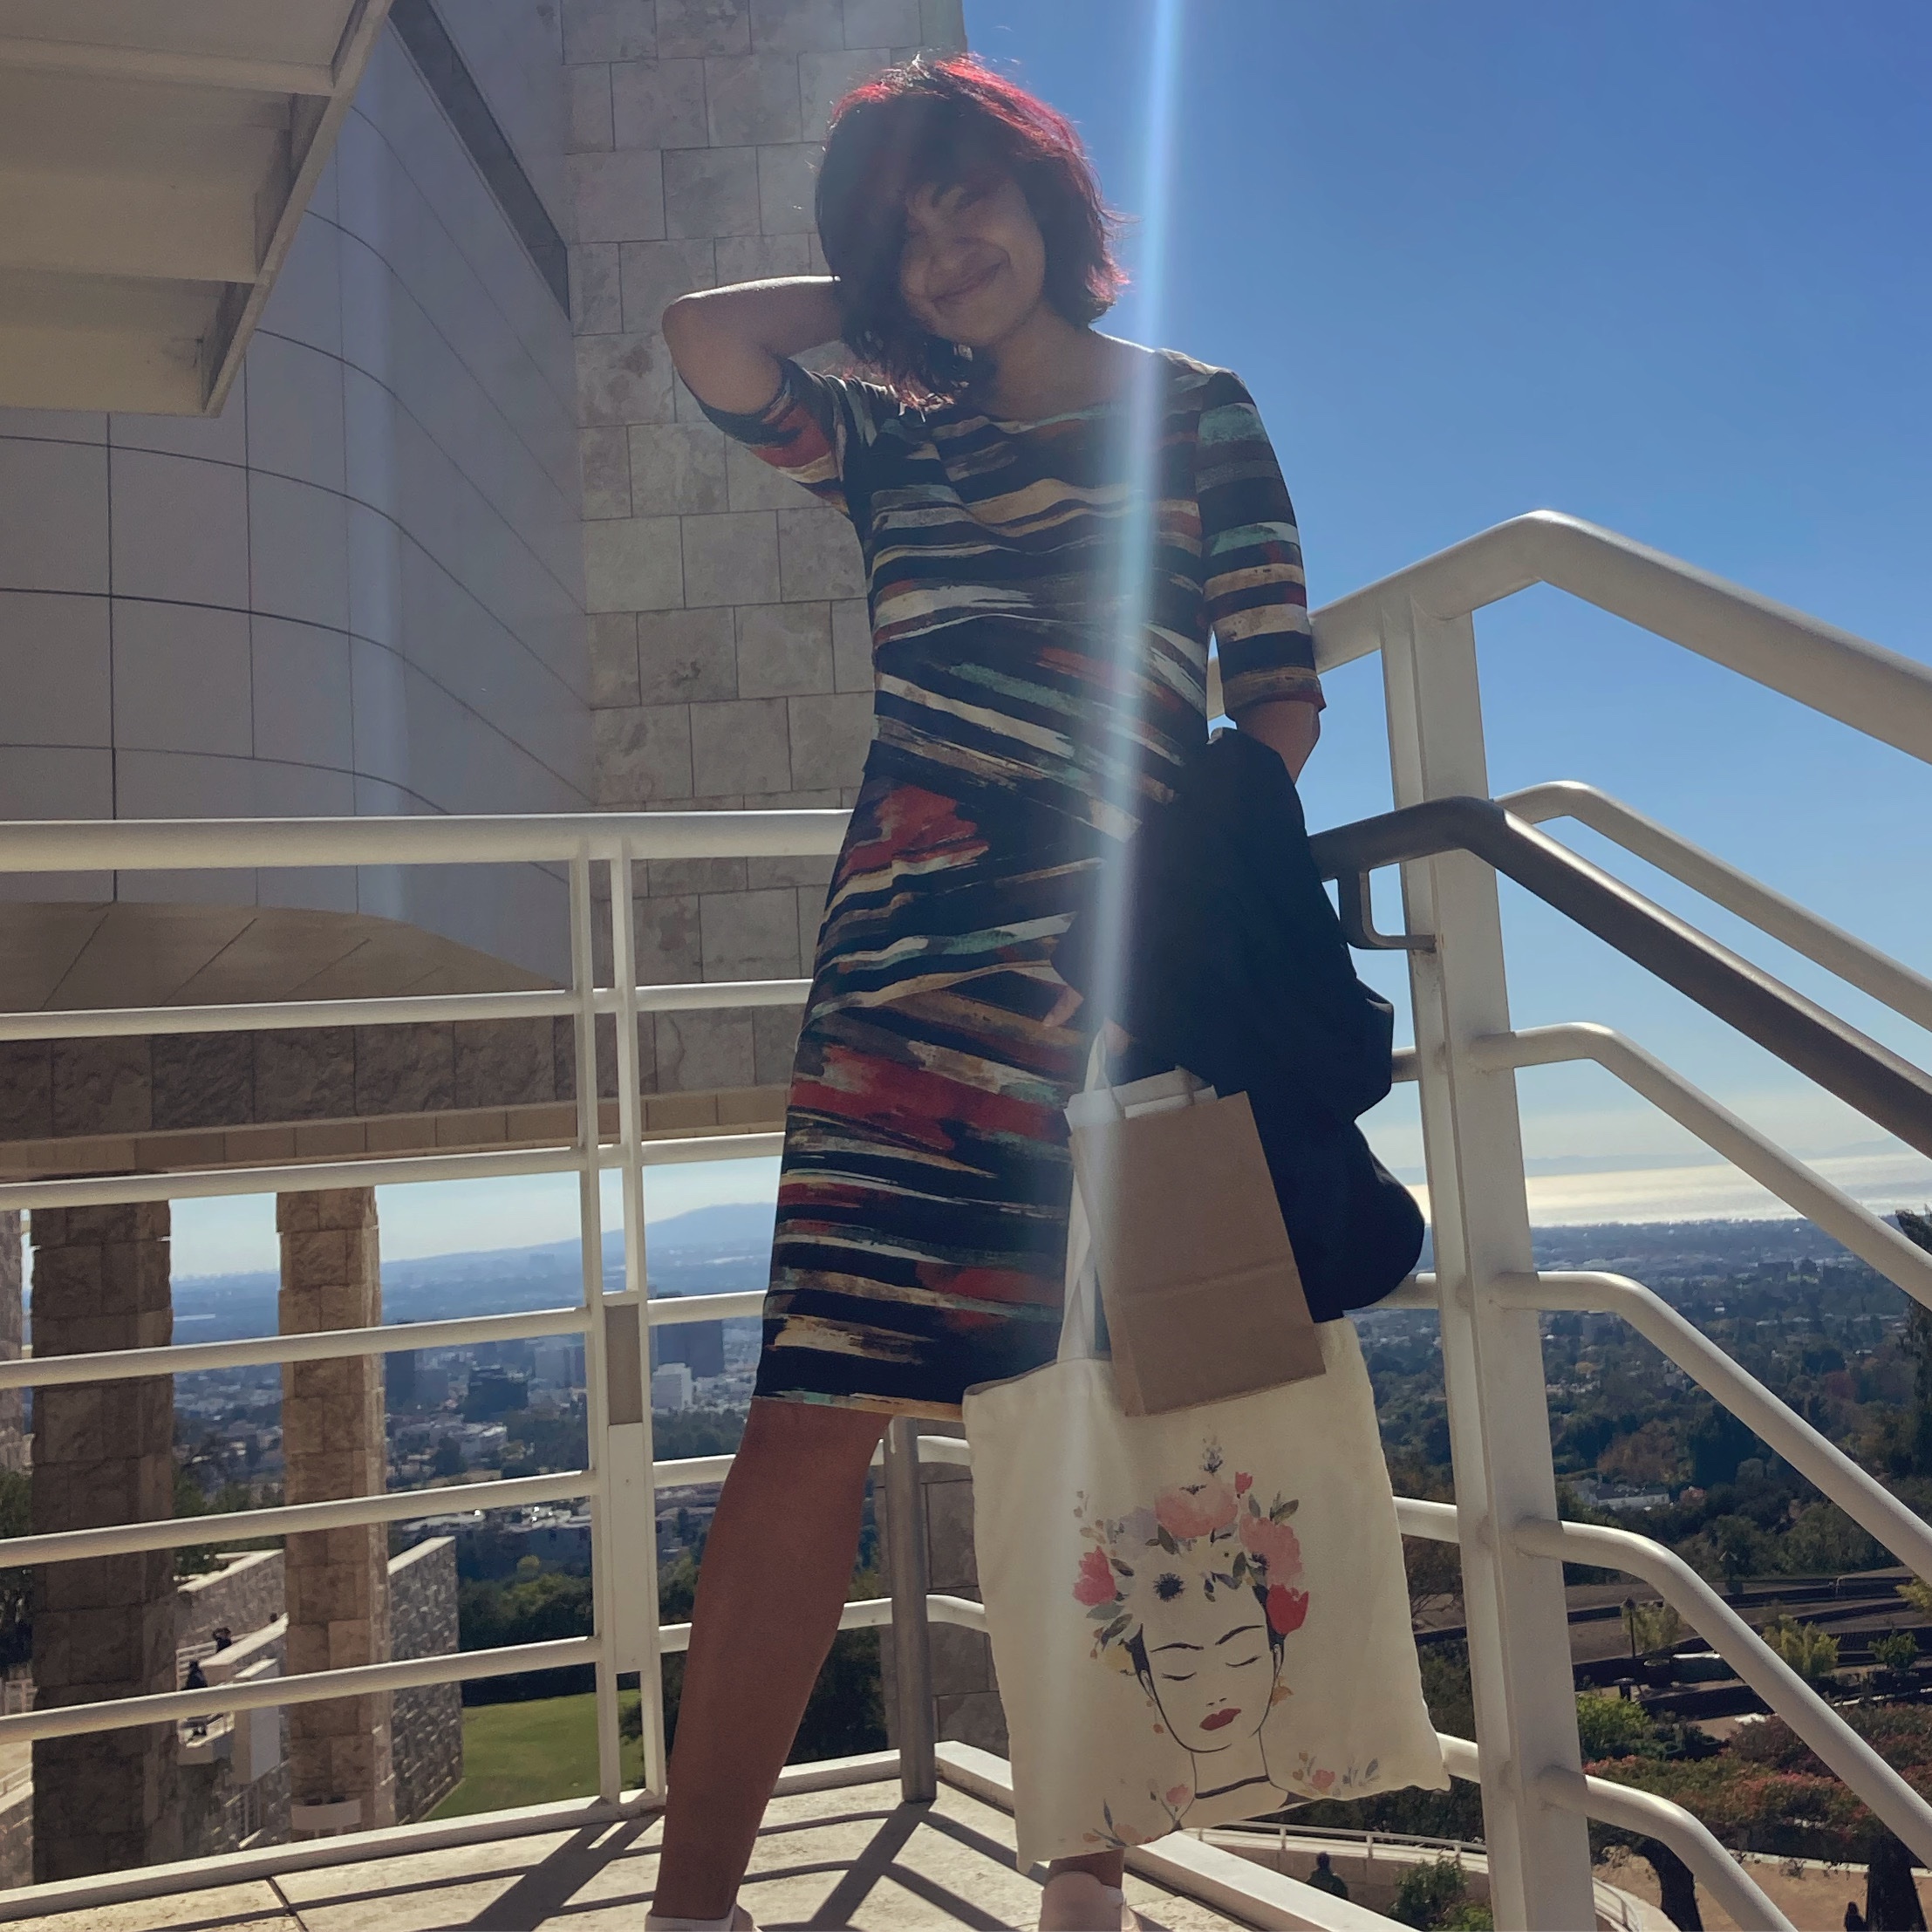 Debakanya is standing on a railed stairway by the water. She is wearing a black dress with colorful, abstractly applied stripes, and is carrying an illustrated tote bag. Her right hand is behind her head and she is smiling.